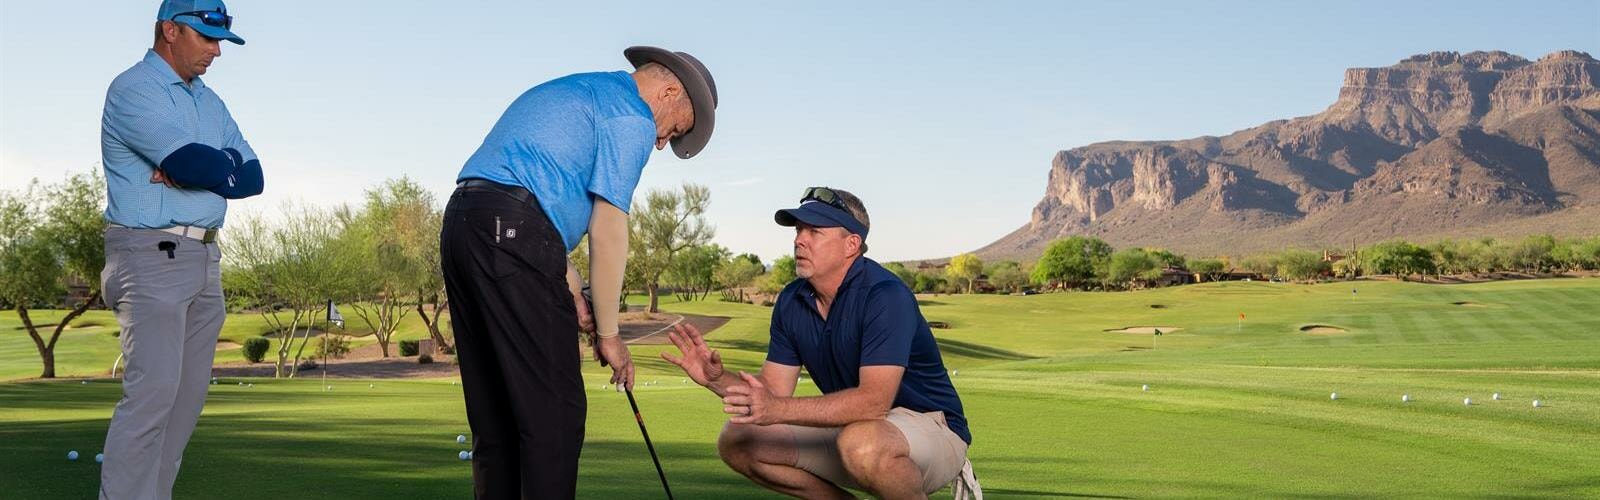 superstition_mountain_golf_lesson